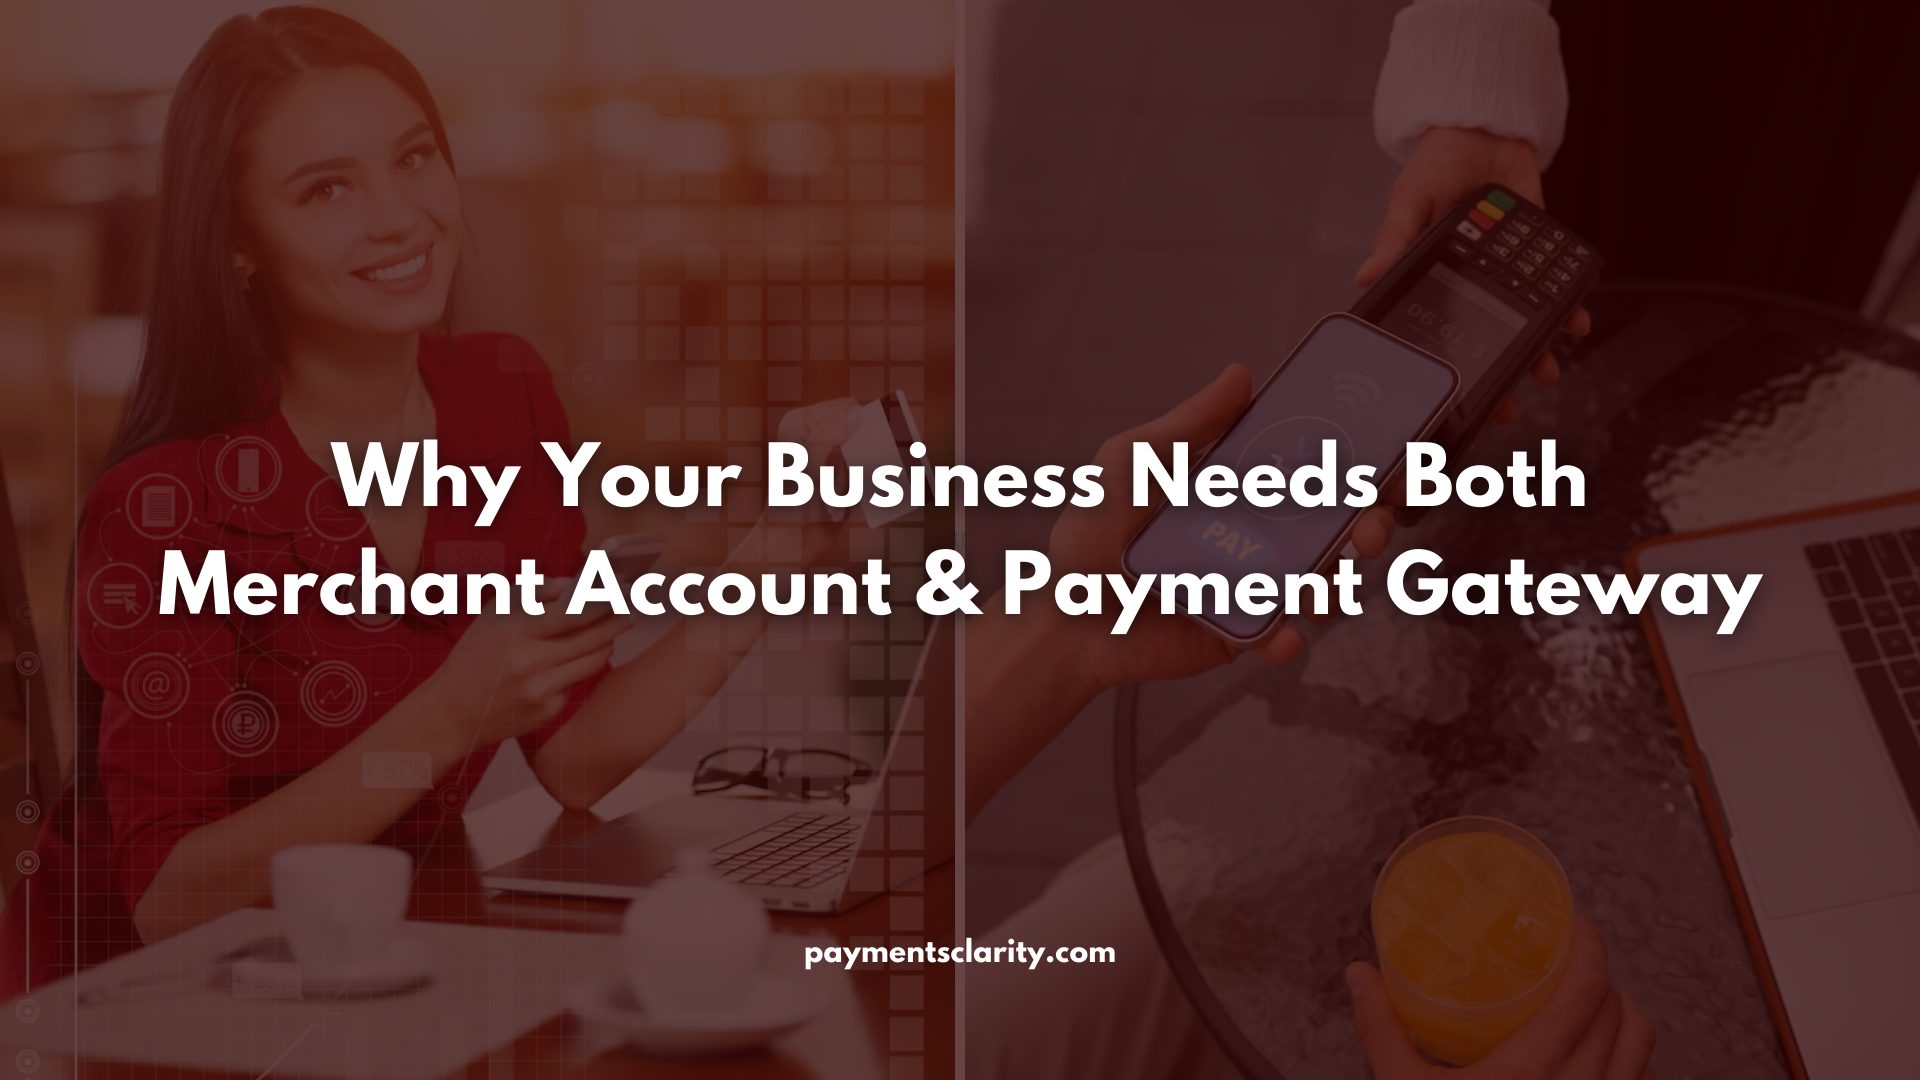 Why Your Business Needs Both Merchant Account & Payment Gateway